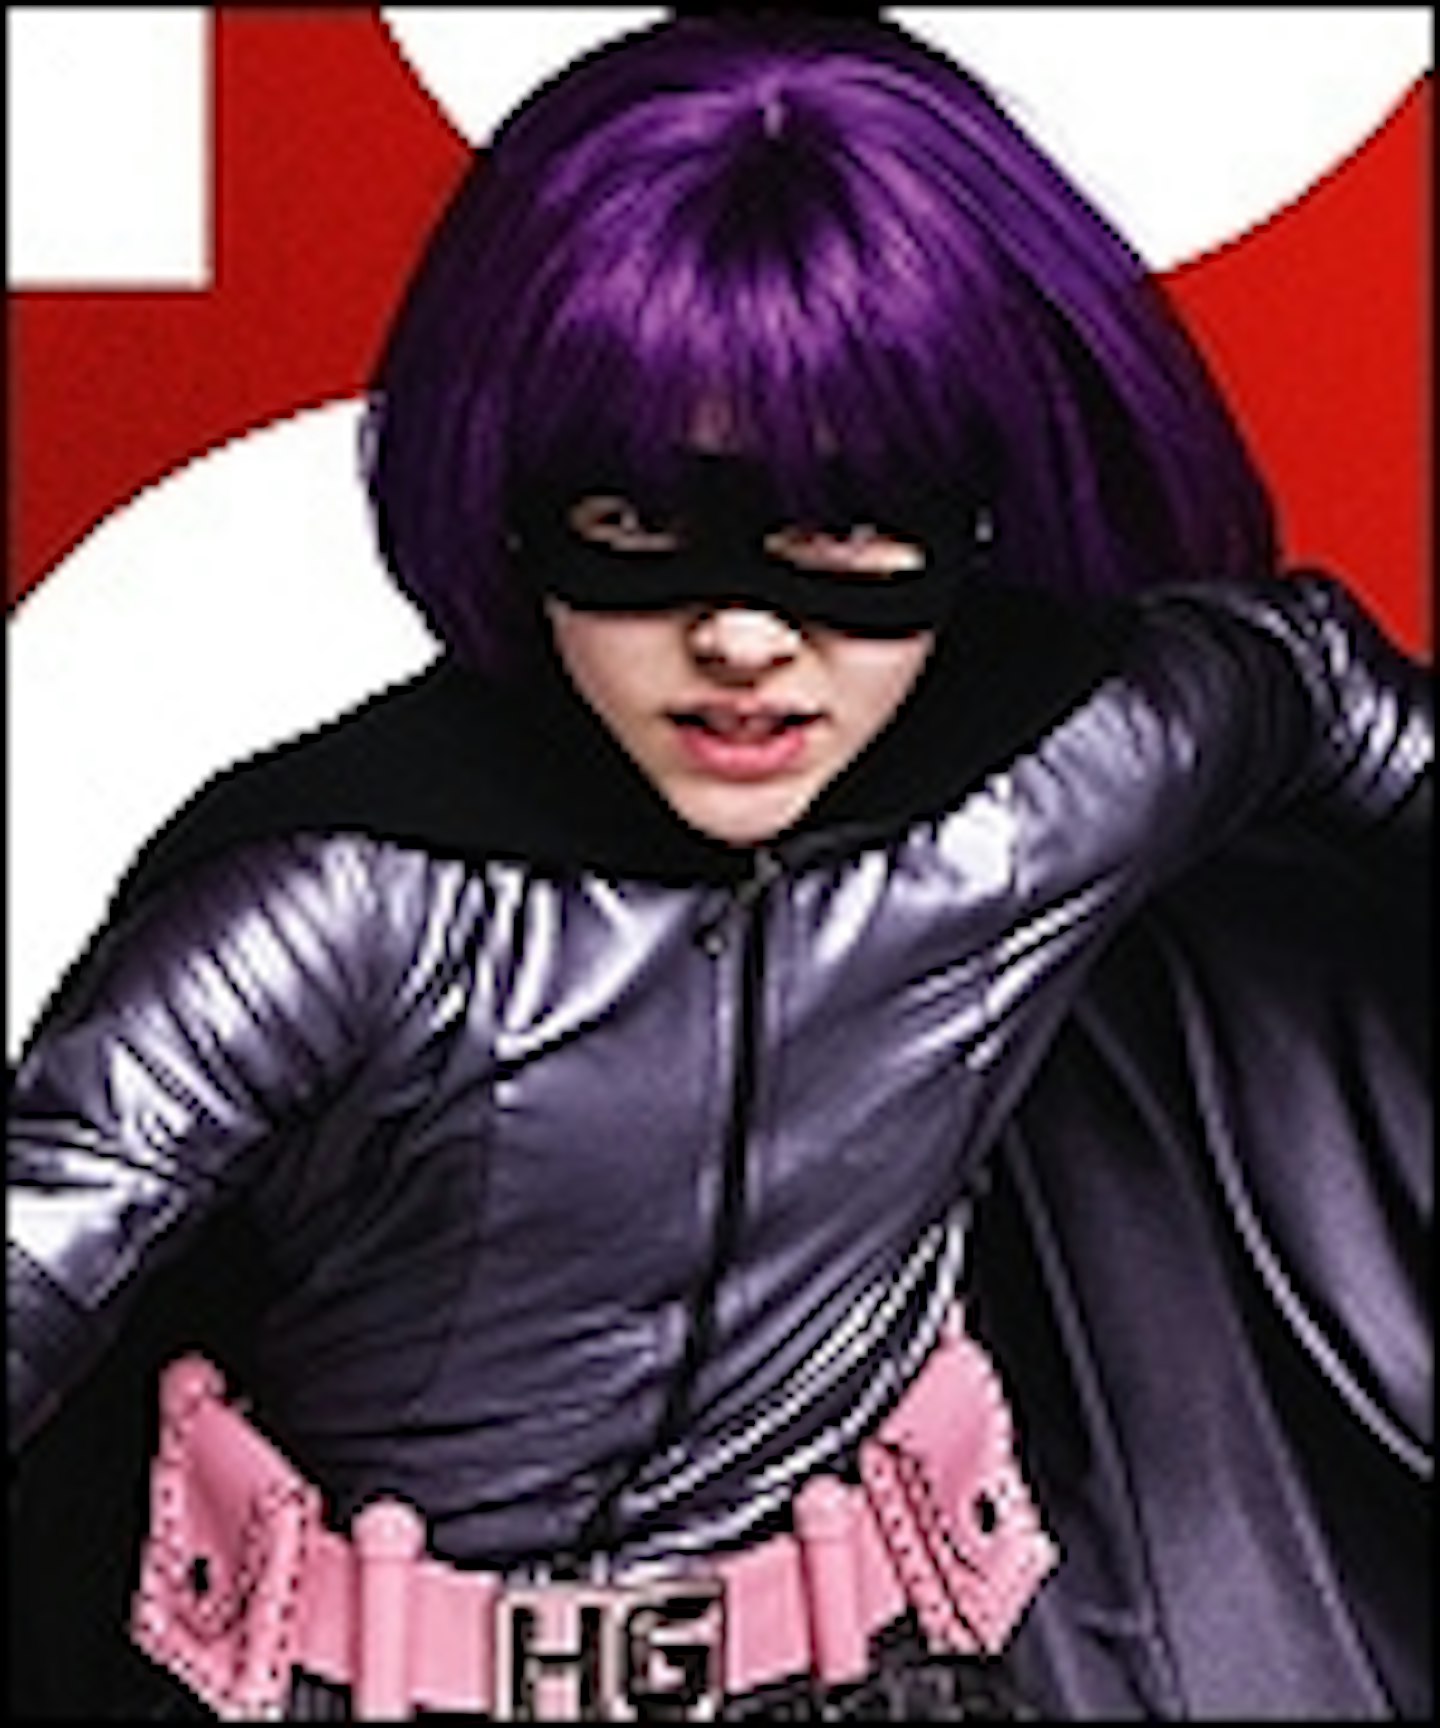 New Kick-Ass Poster: Now With Hit Girl